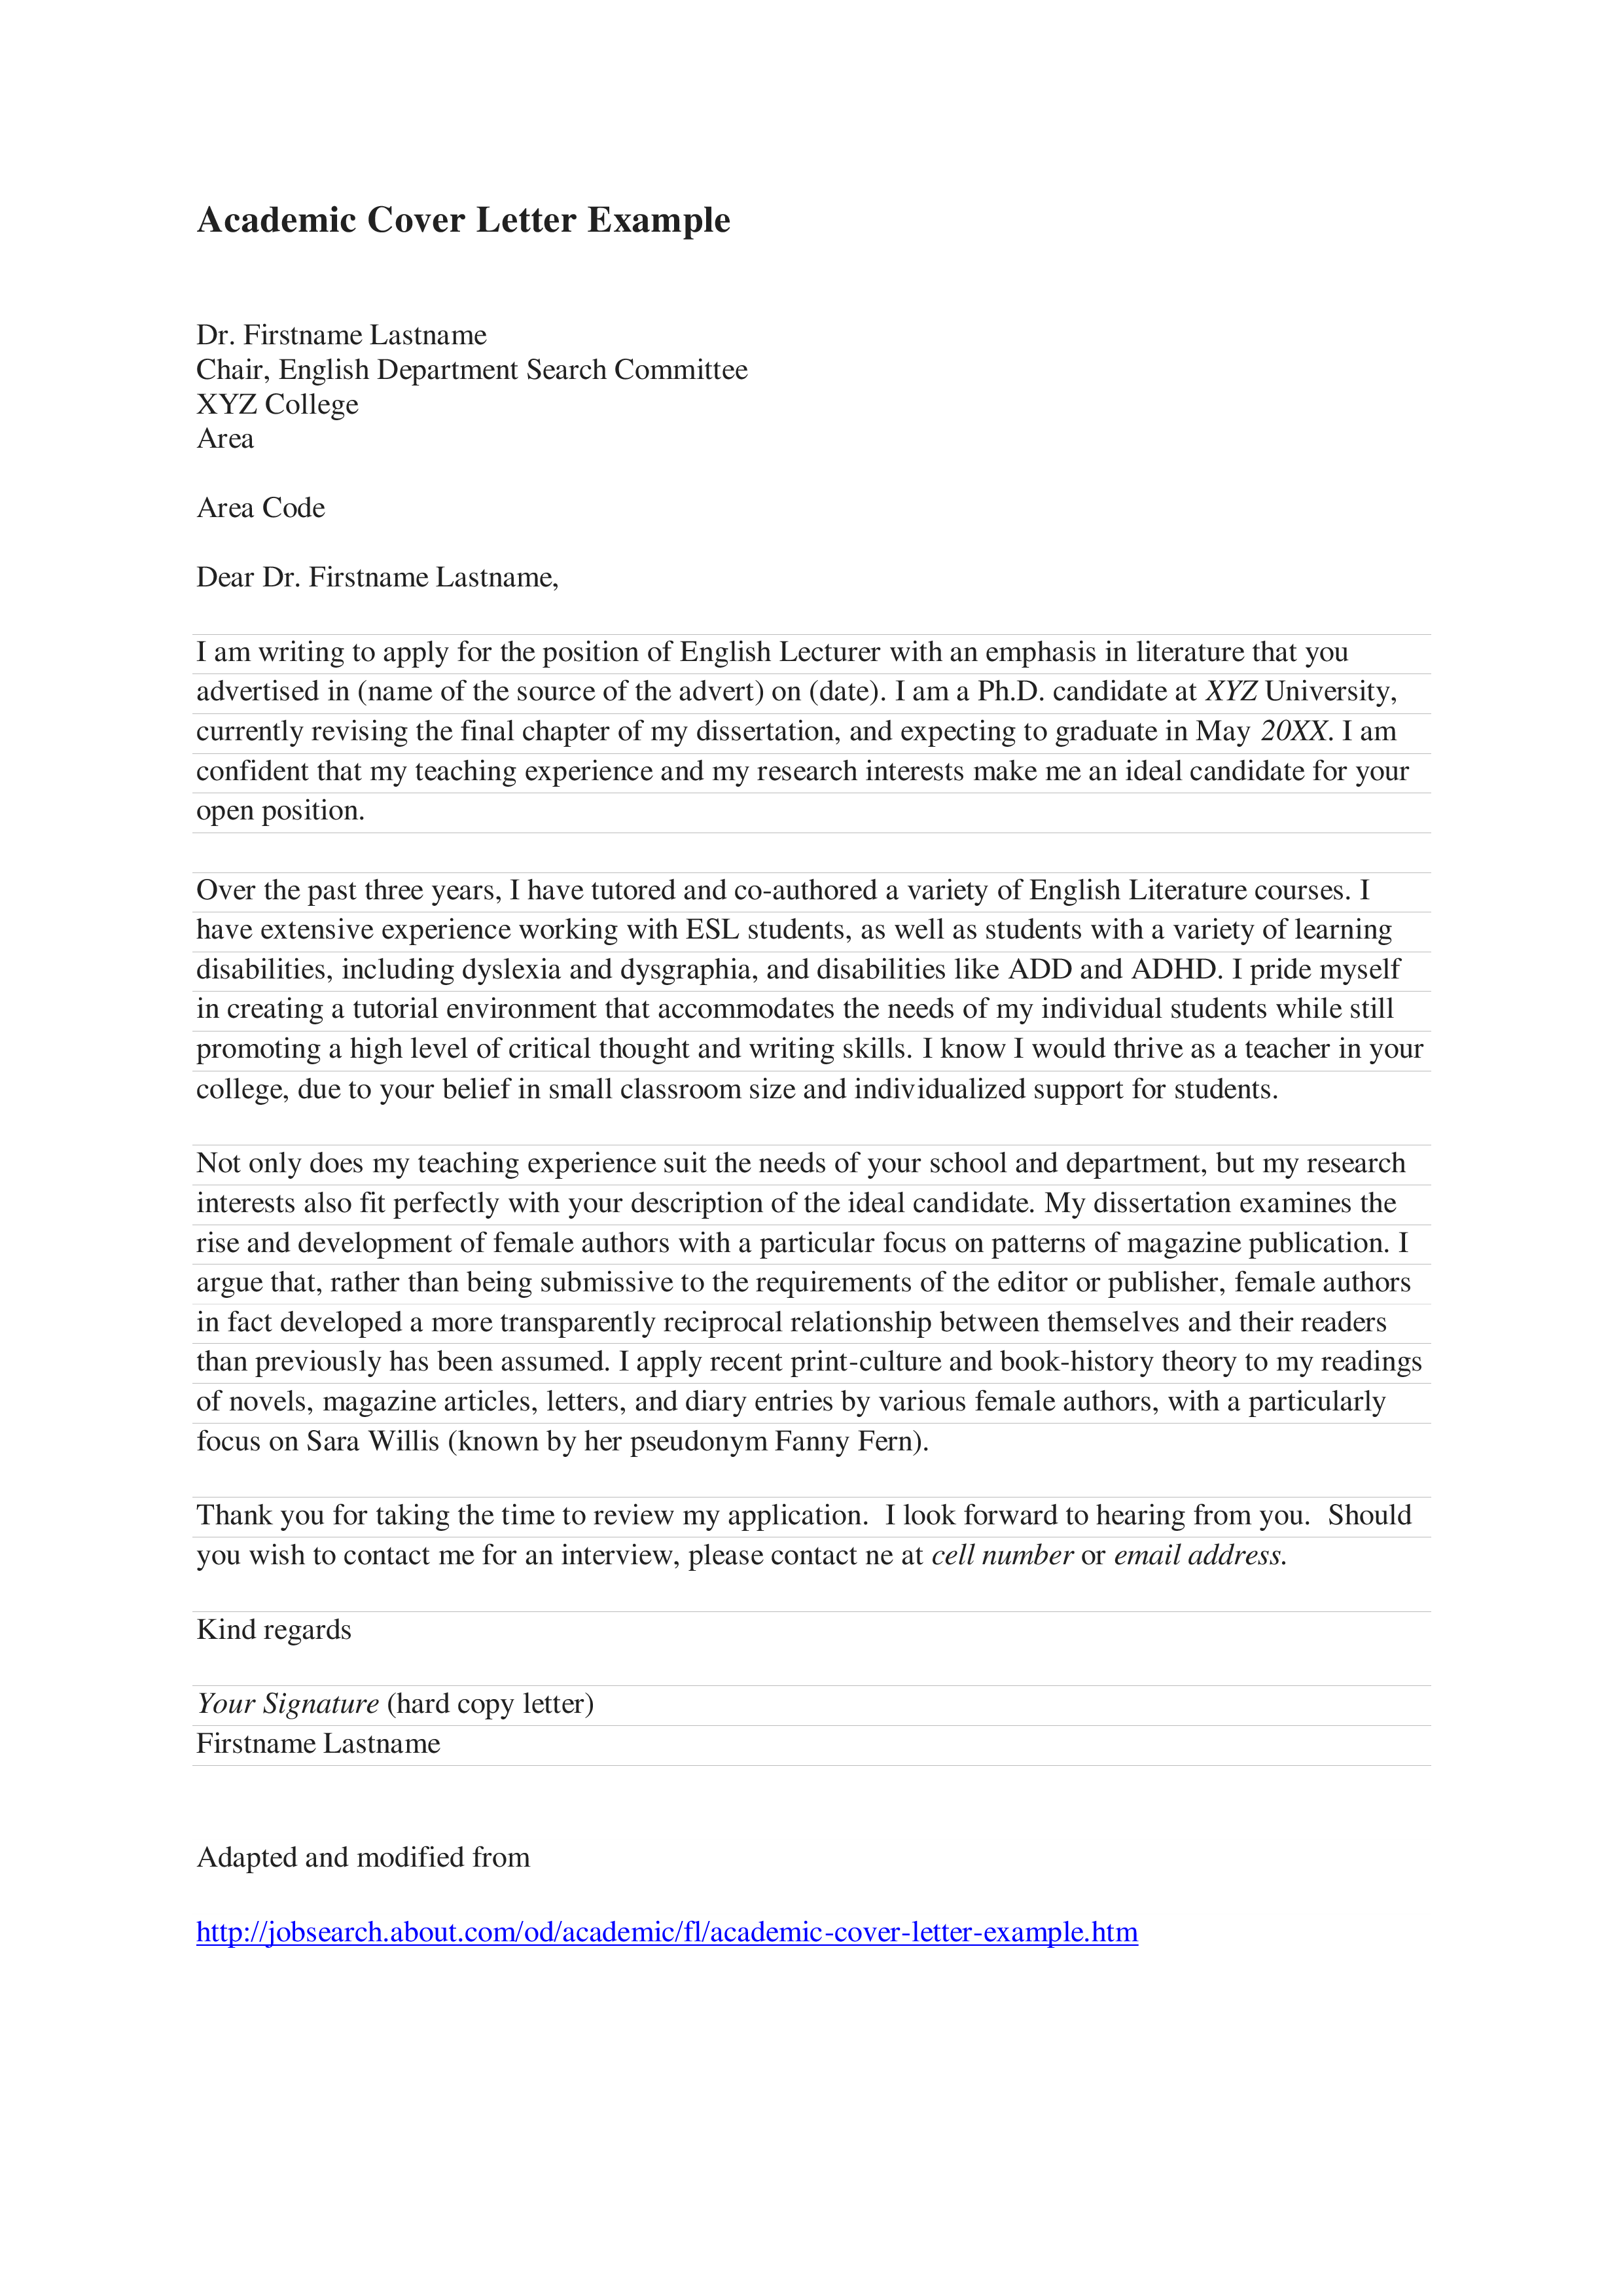 brown university cover letter examples